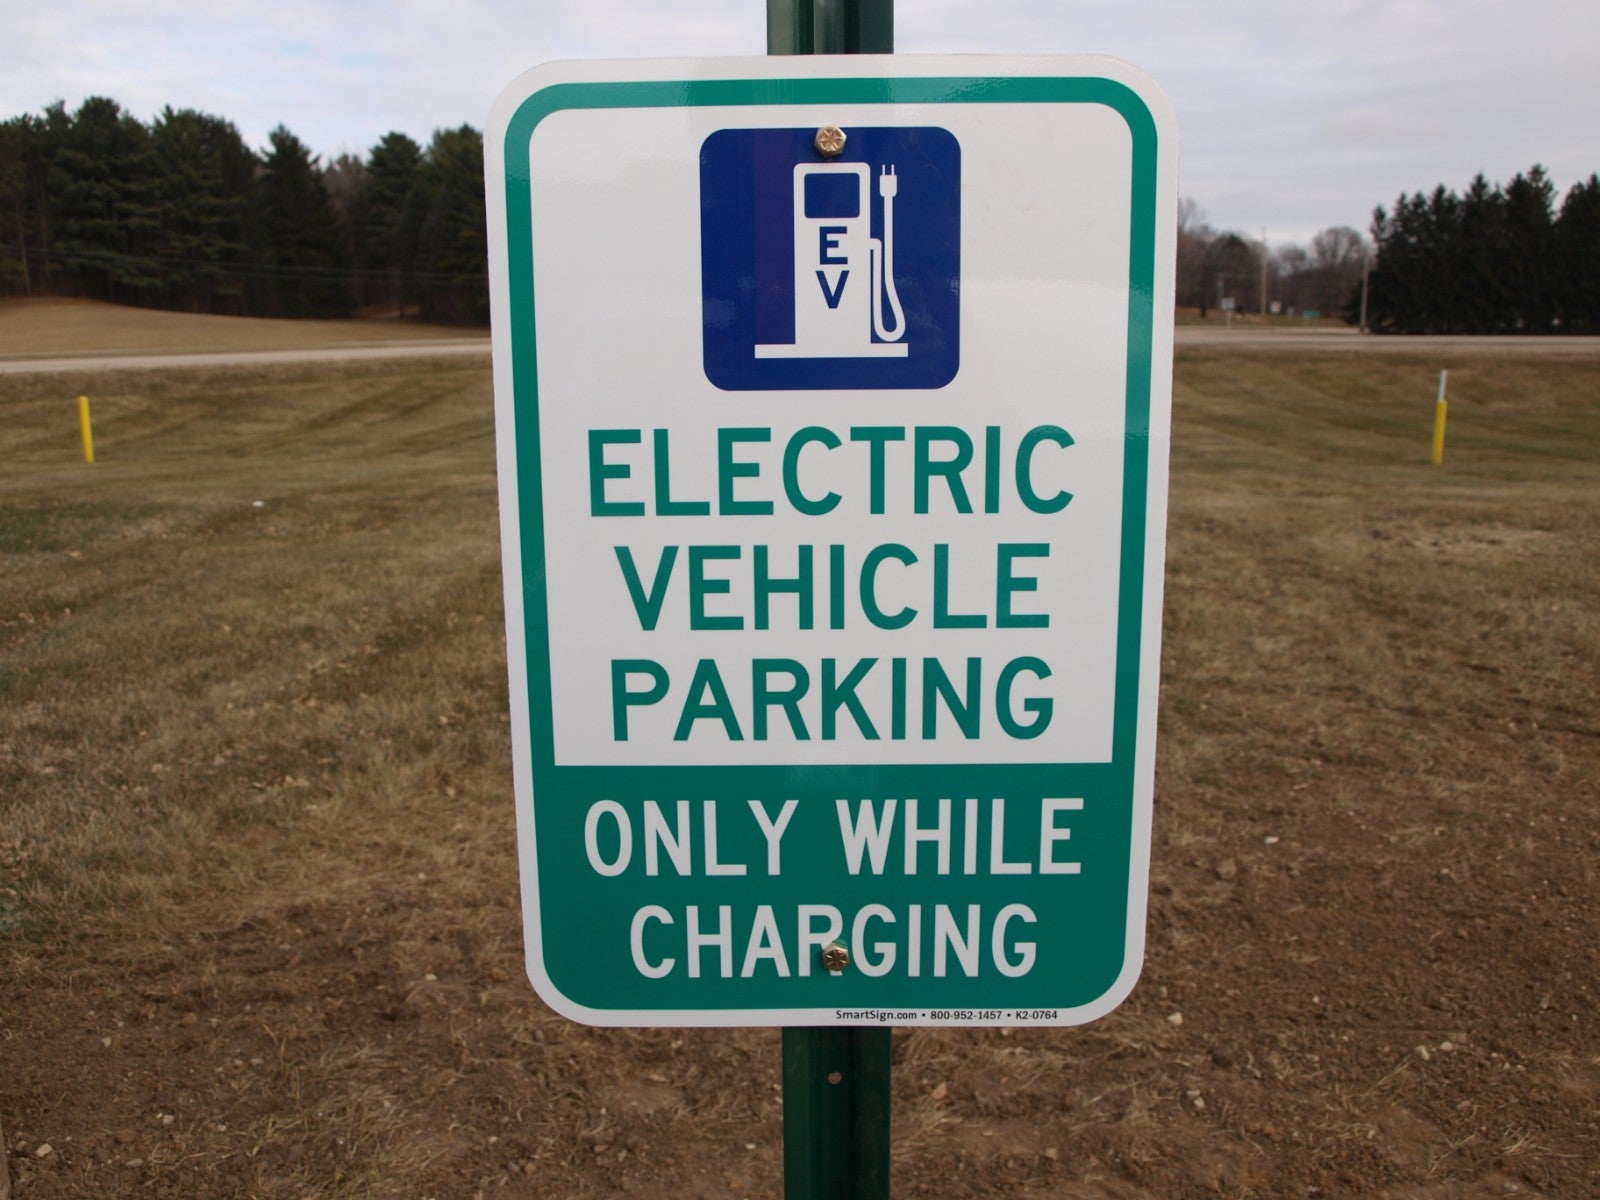 EV Parking - Only while charging